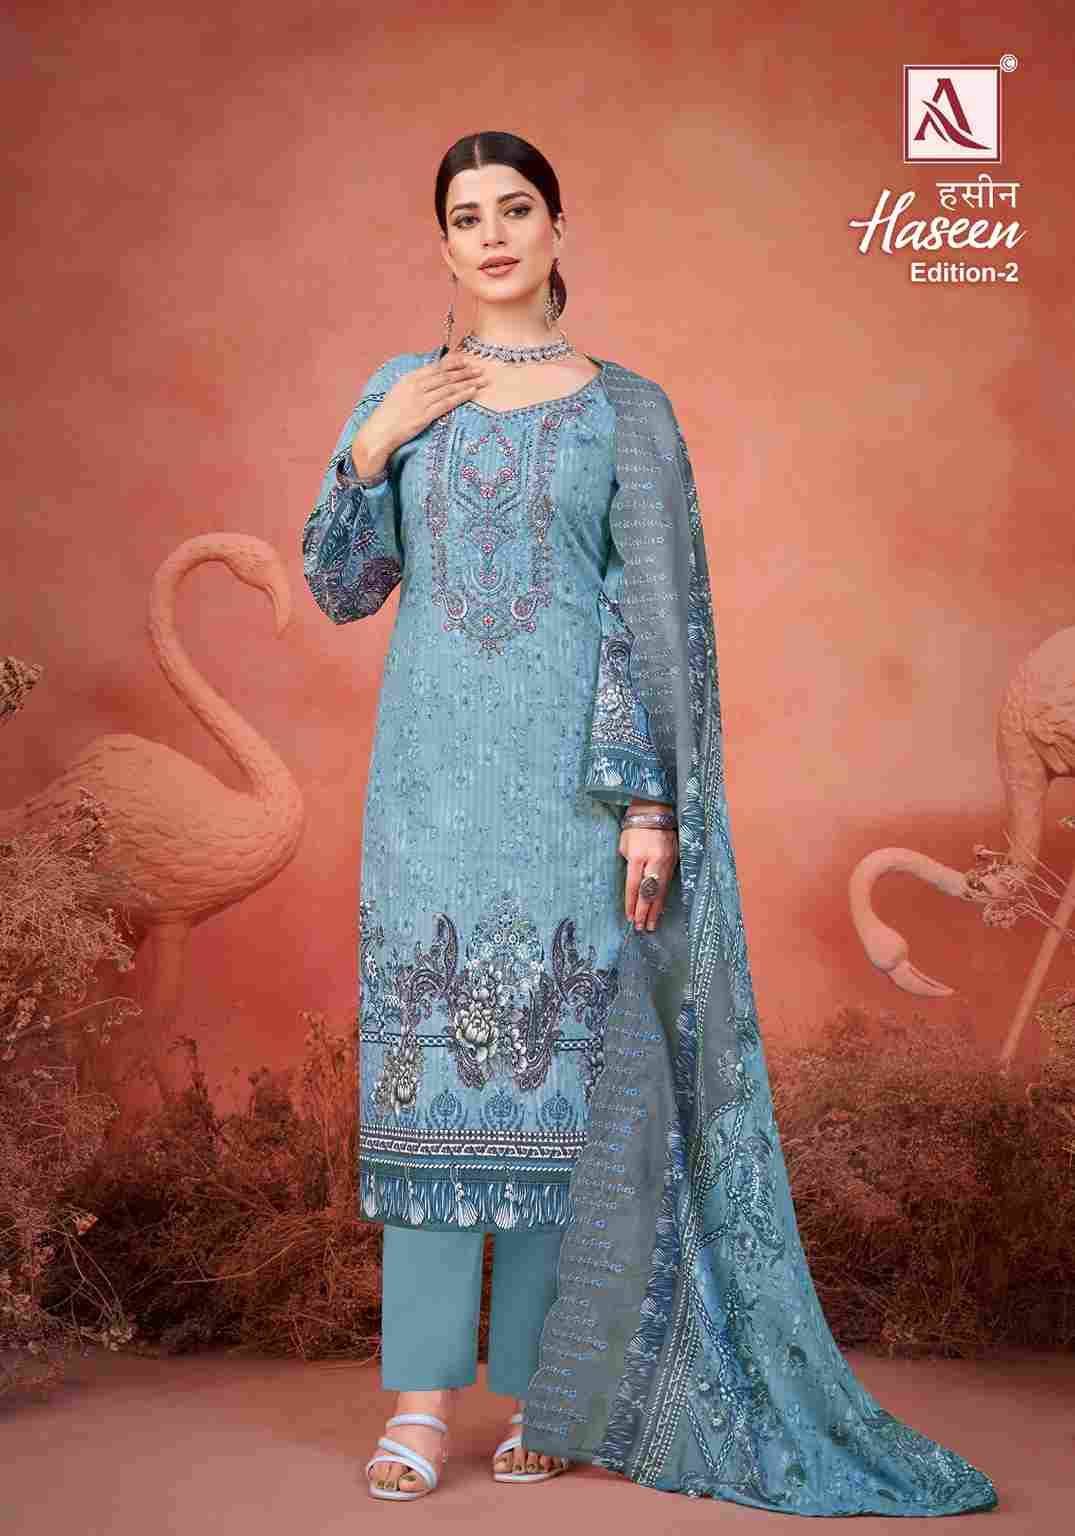 Haseen Vol-2 By Alok Suit 1515-001 To 1515-008 Series Indian Traditional Wear Collection Beautiful Stylish Fancy Colorful Party Wear & Wear Cambric Cotton Dress At Wholesale Price